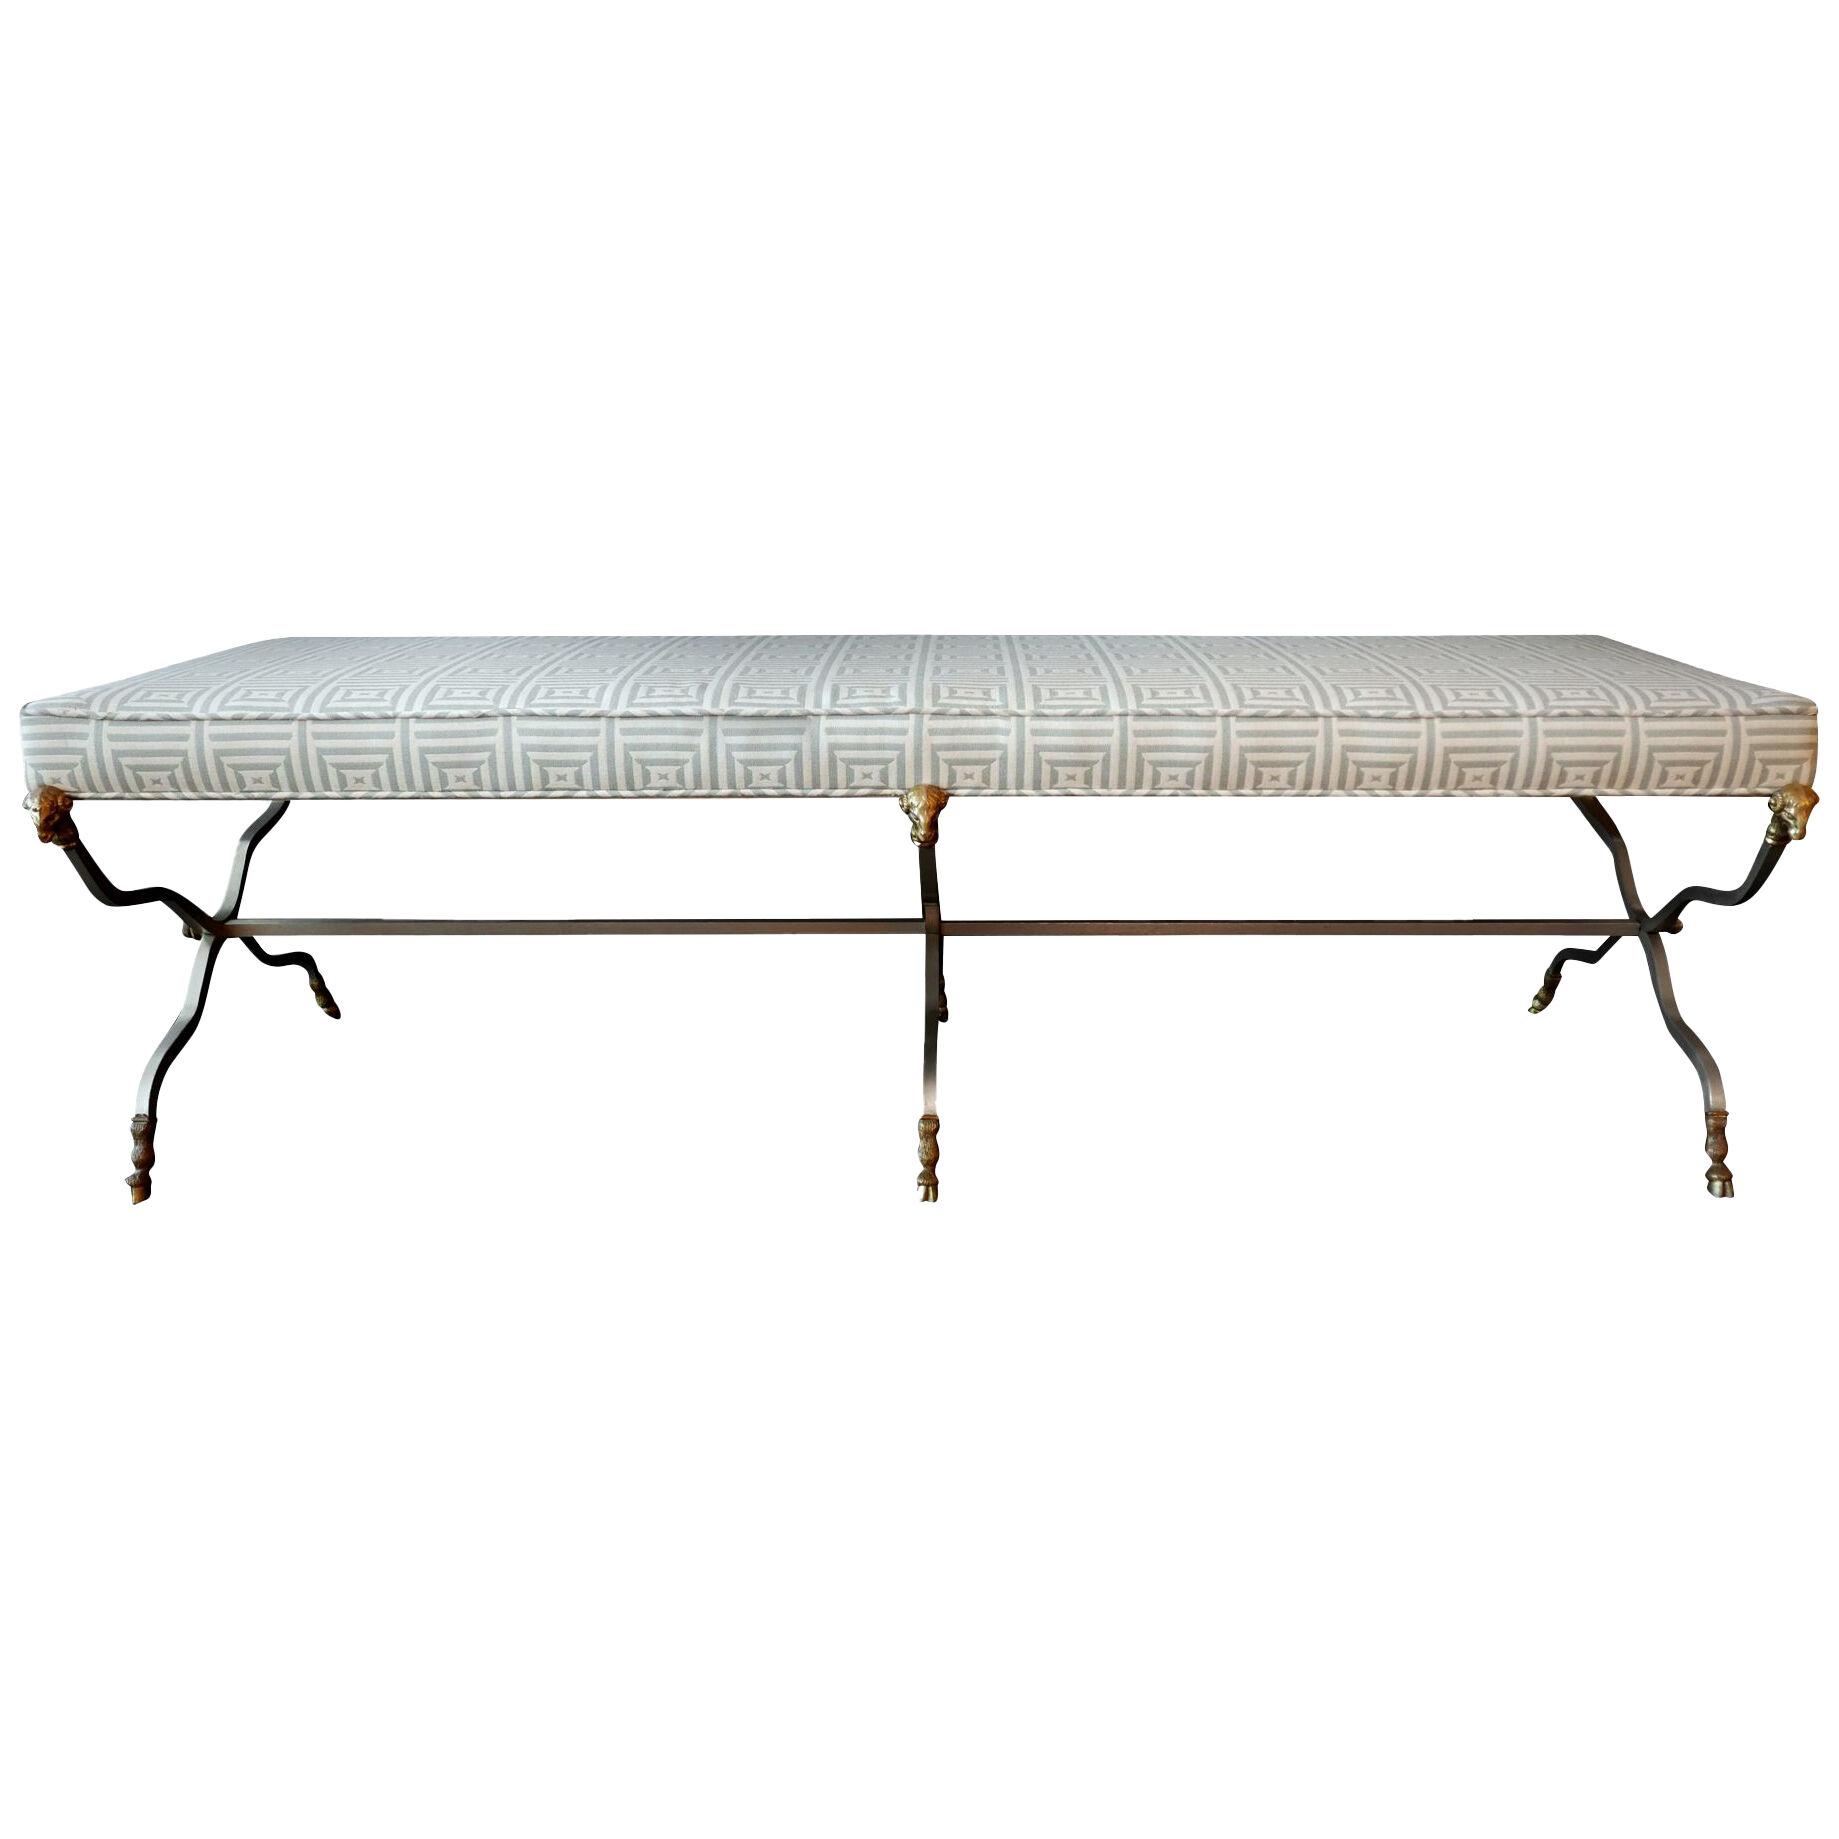 Maison Jansen Steel and Brass Neoclassic Style Bench